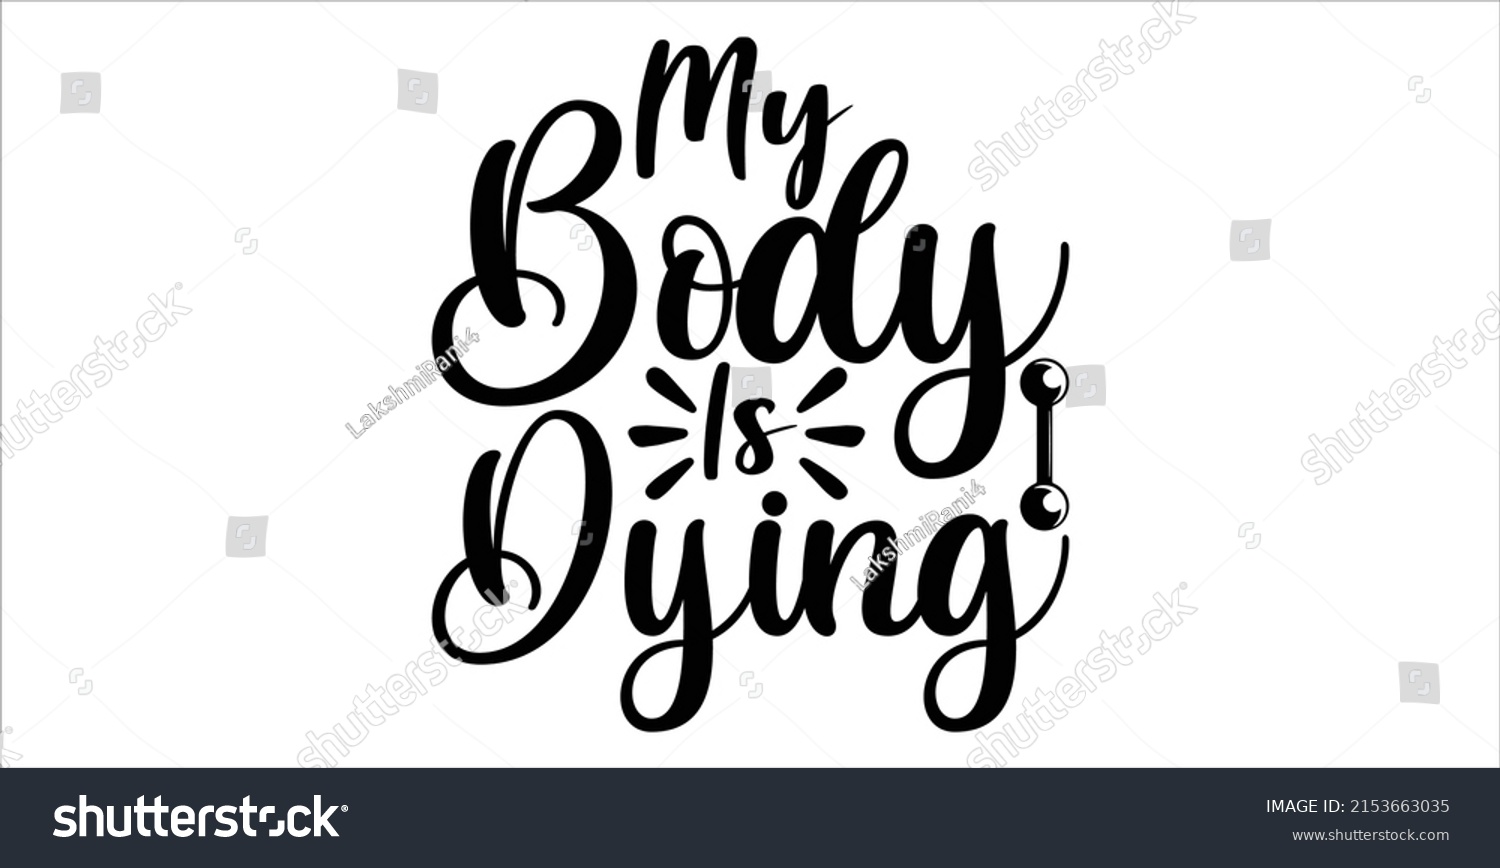 SVG of  My Body Is Dying  -   Lettering design for greeting banners, Mouse Pads, Prints, Cards and Posters, Mugs, Notebooks, Floor Pillows and T-shirt prints design.
 svg